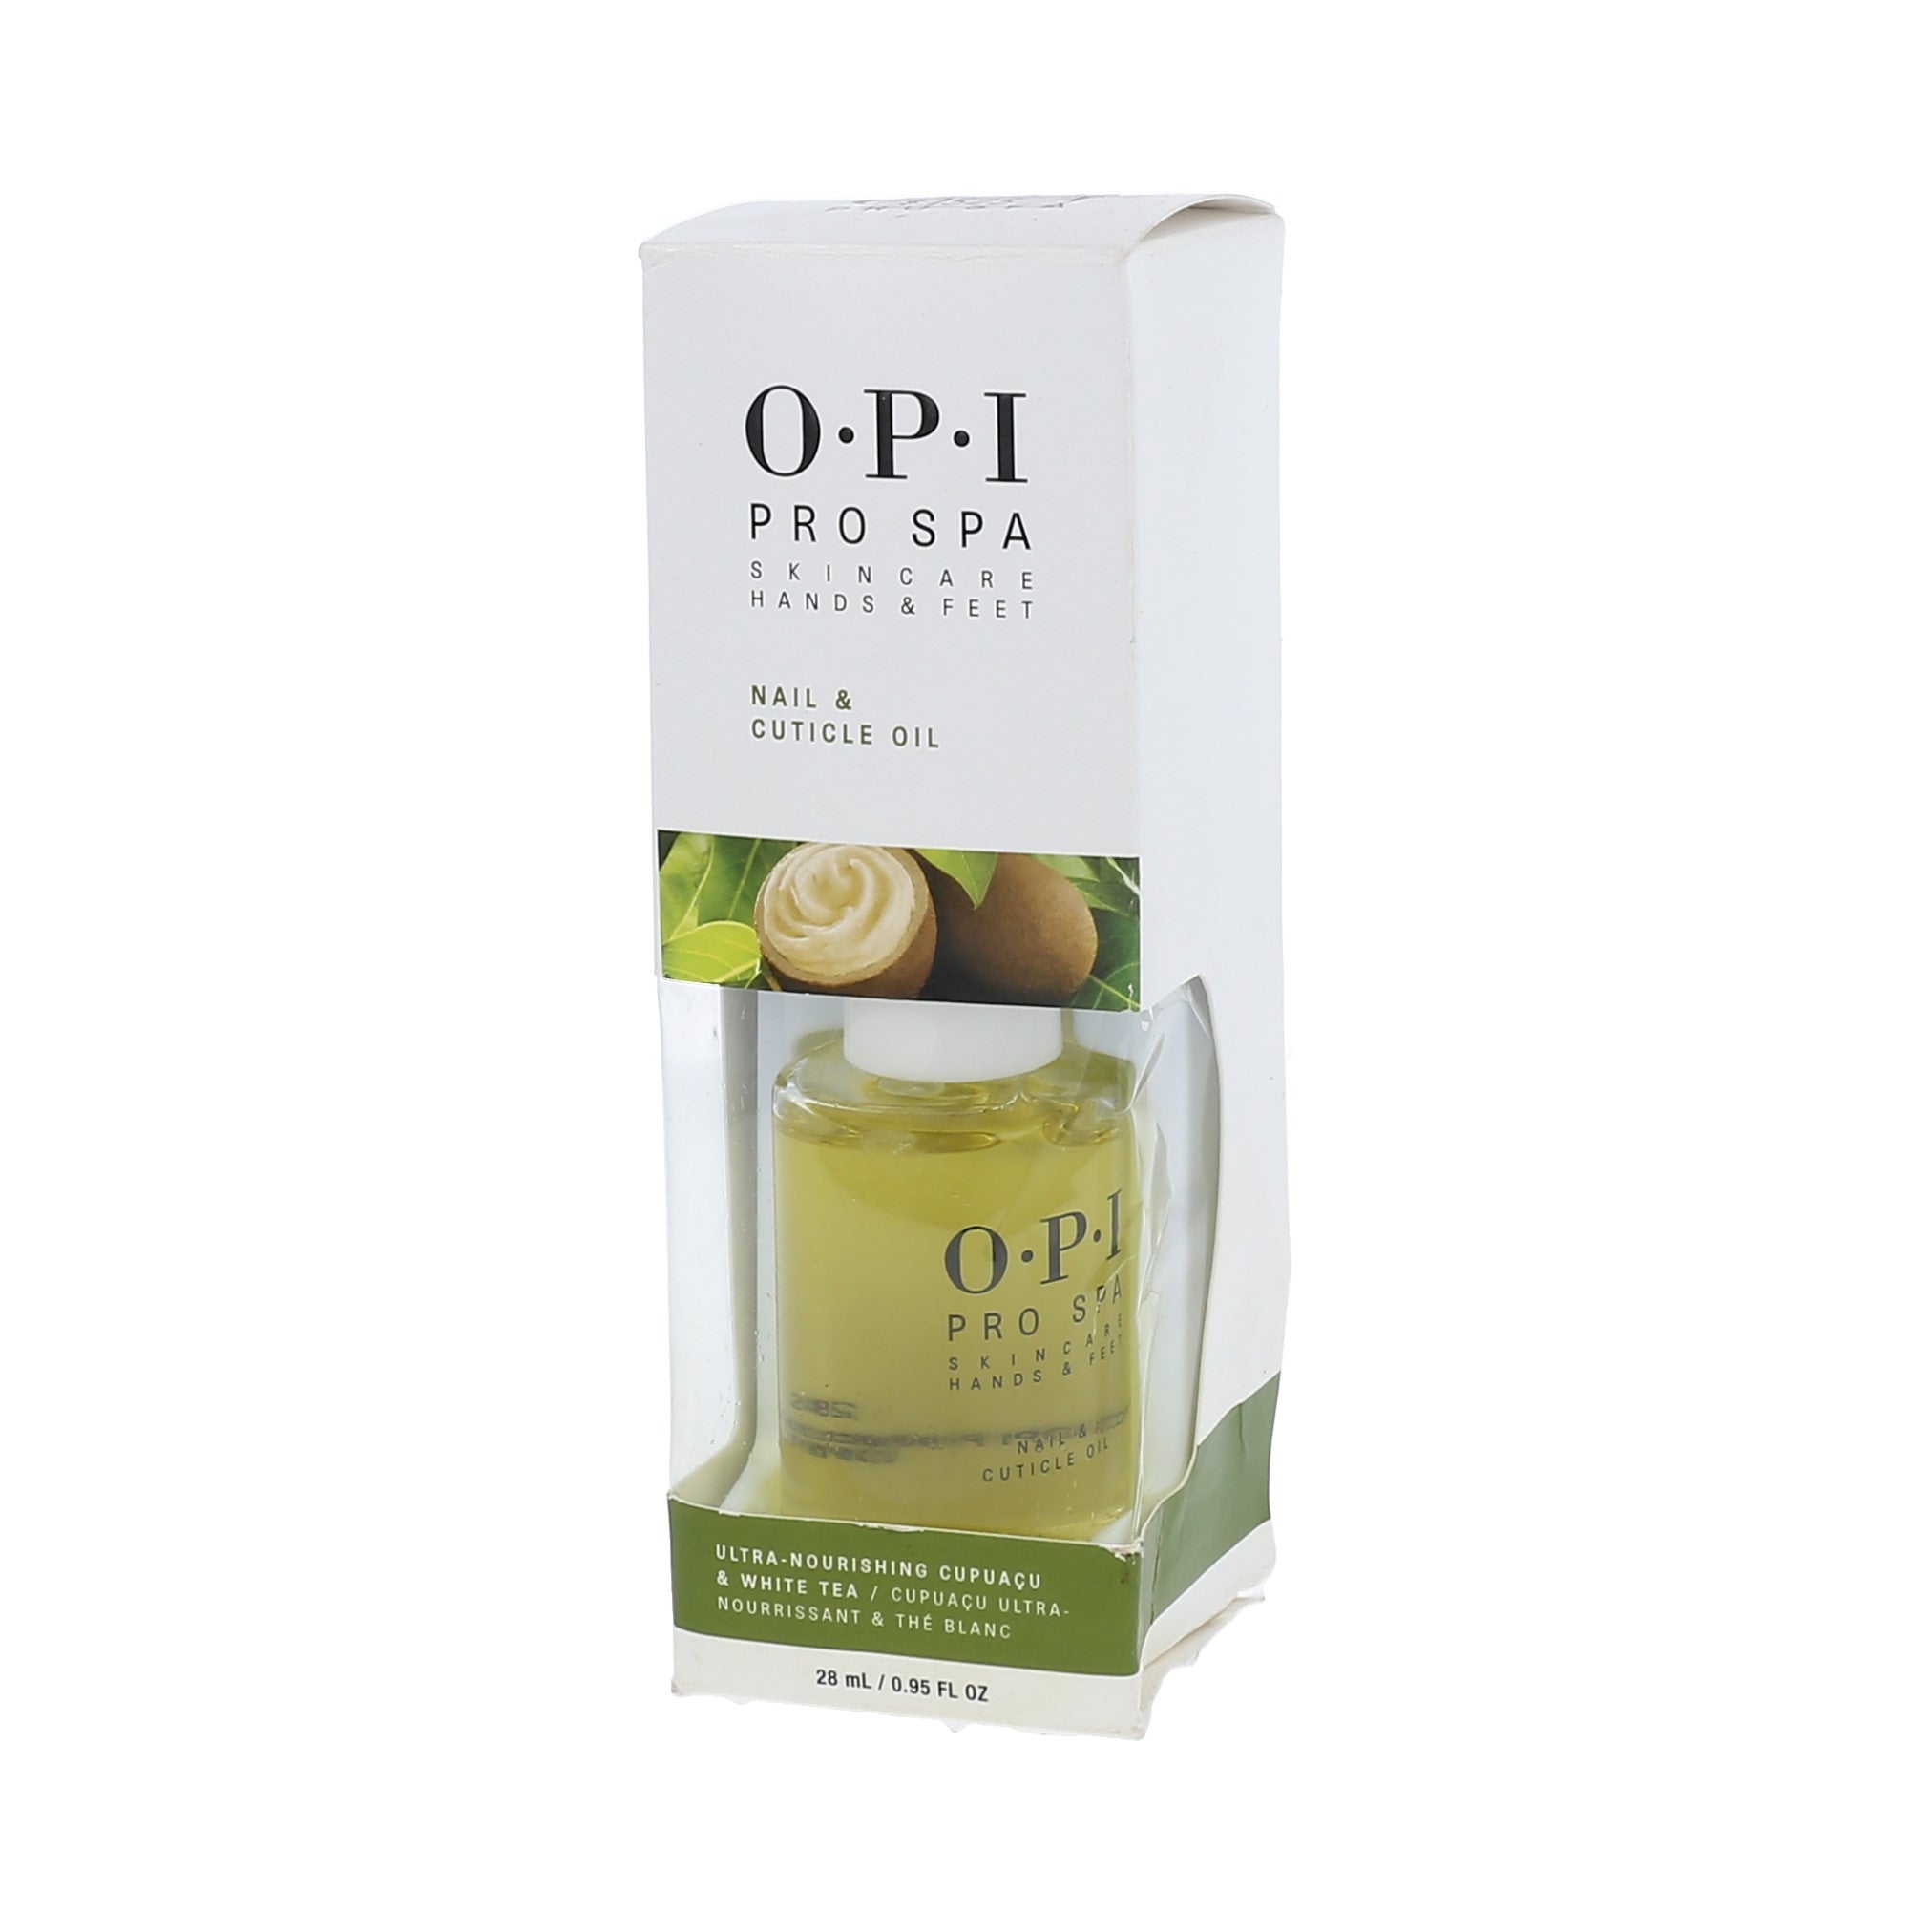 OPI PRO SPA NAIL Y CUTICLE OIL